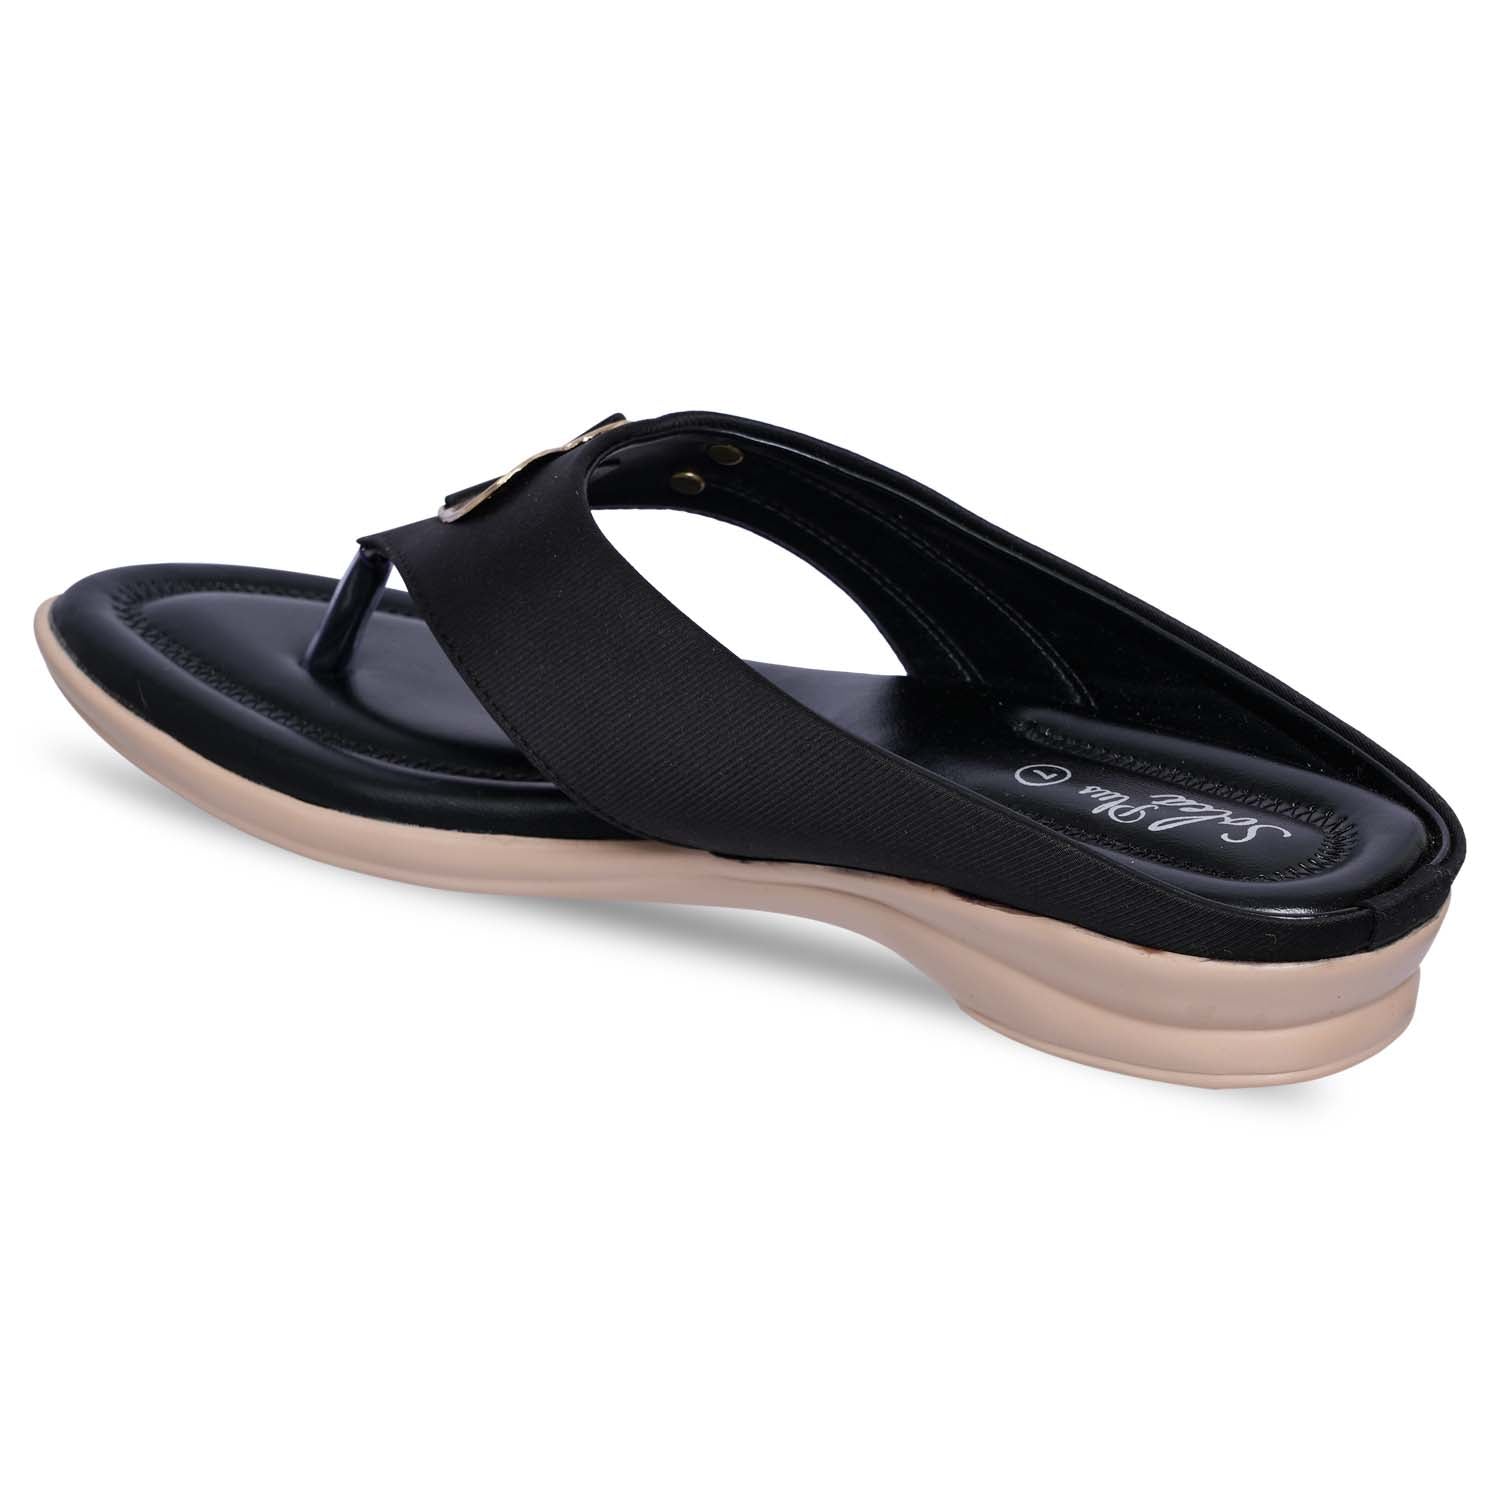 Paragon R1012L Women Sandals | Casual &amp; Formal Sandals | Stylish, Comfortable &amp; Durable | For Daily &amp; Occasion Wear